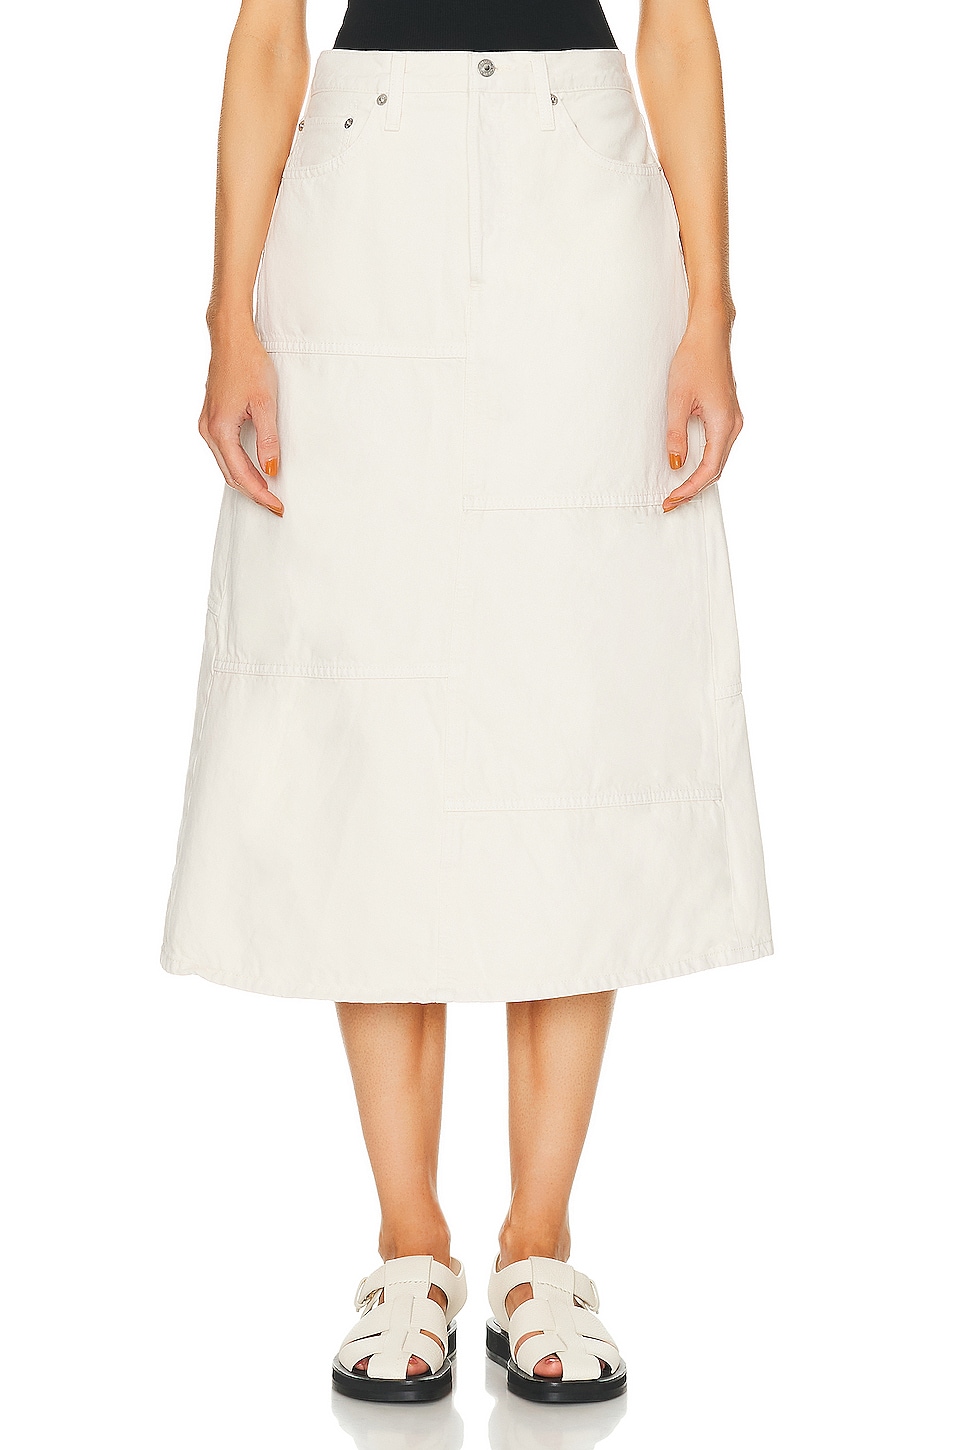 RE/DONE Mid Rise Seamed Skirt in Vintage White | FWRD